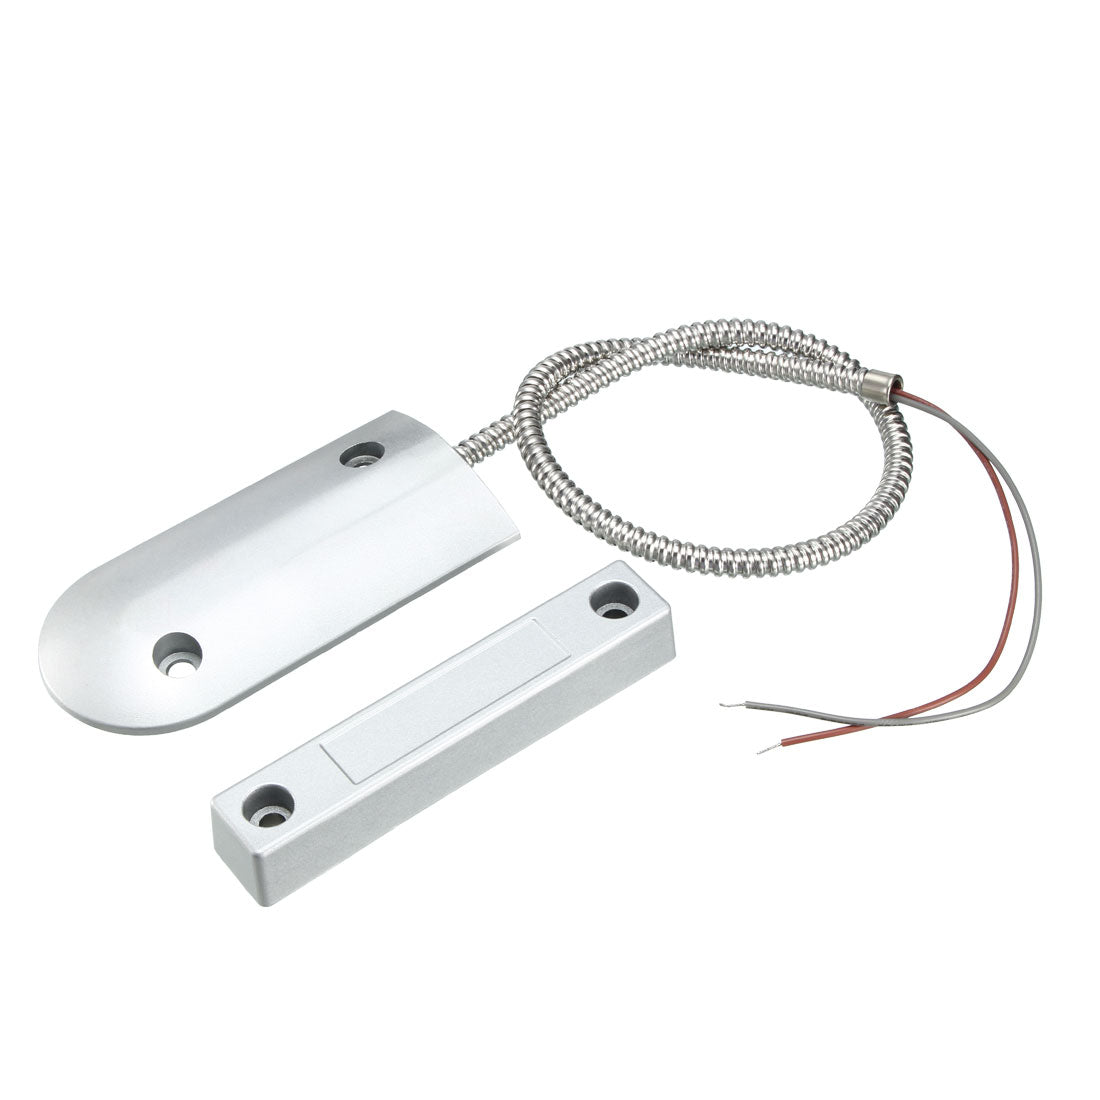 uxcell Uxcell OC-60B NO Alarm Security Rolling Gate Garage Door Contact Magnetic Reed Switch